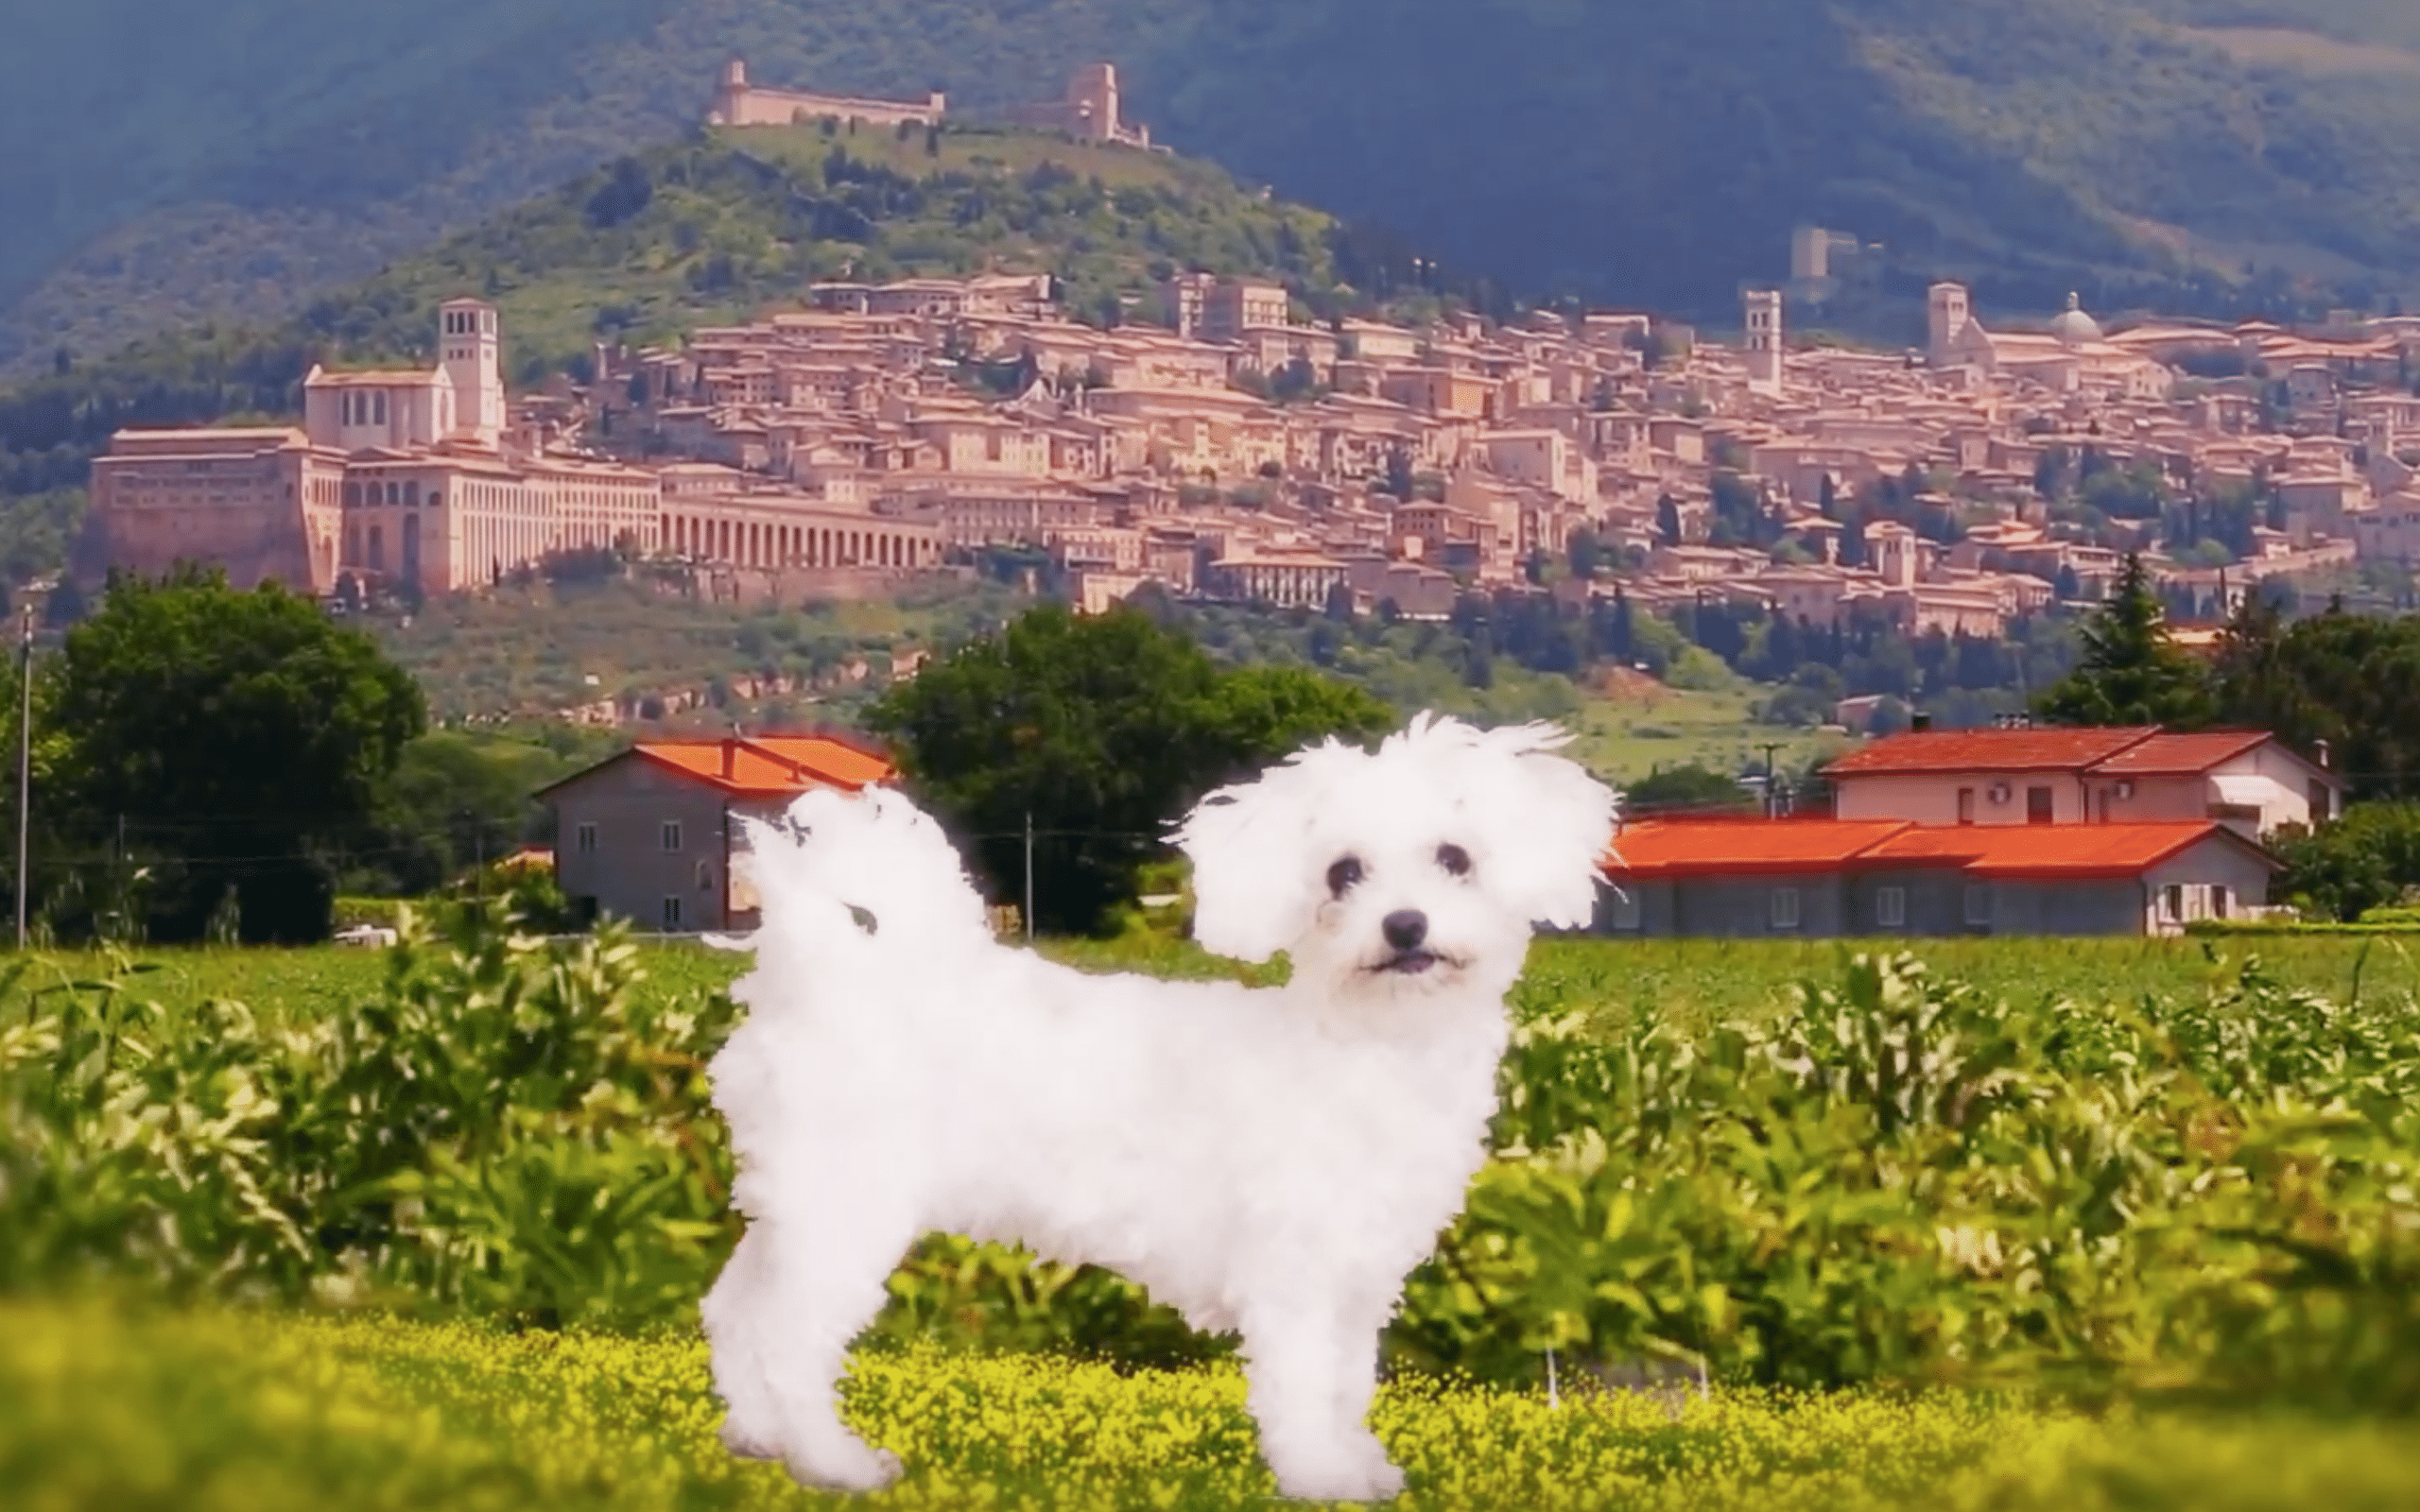 Perillo Tours Harry and Maria features Bichon Frise named Maria as she stands in front of a landscape of an Italian village, a scene from the Perillo Tours Talking Dog Commercial (video production by Merging Media).